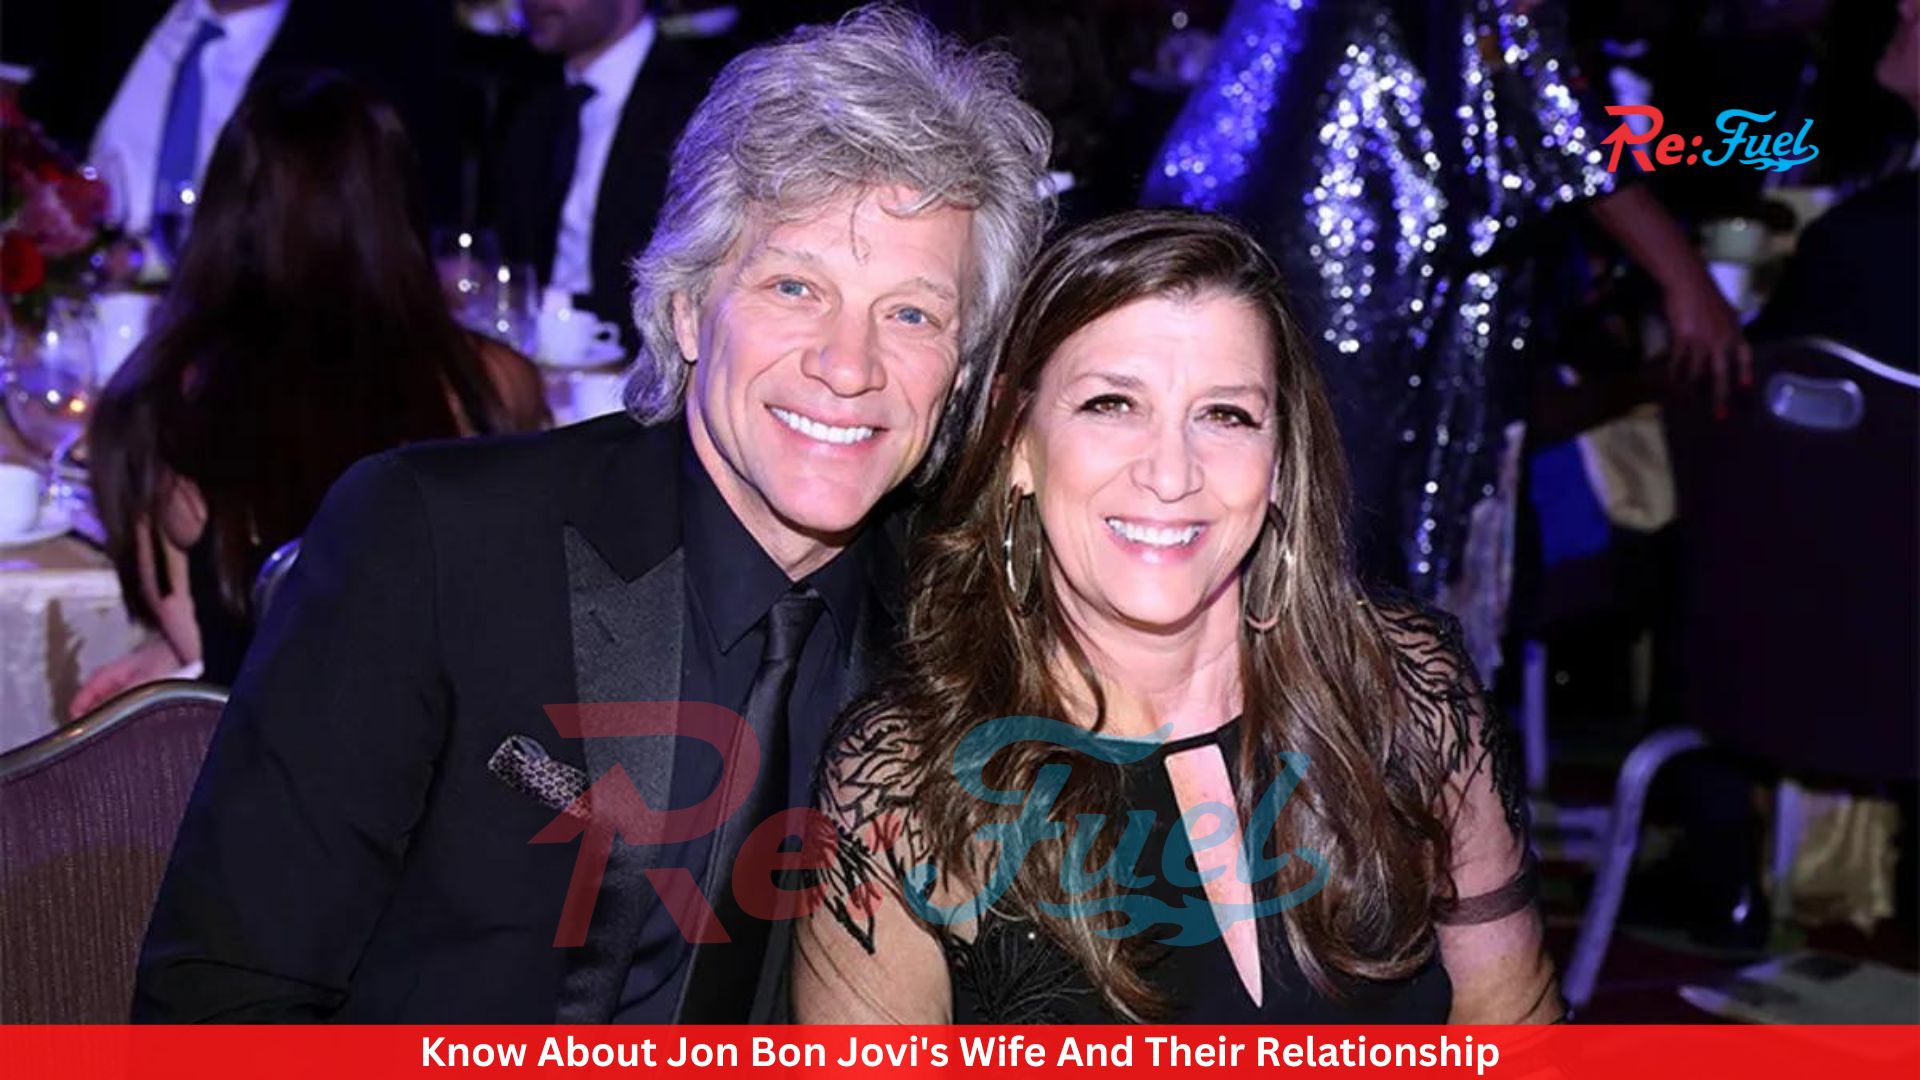 Know About Jon Bon Jovi's Wife And Their Relationship